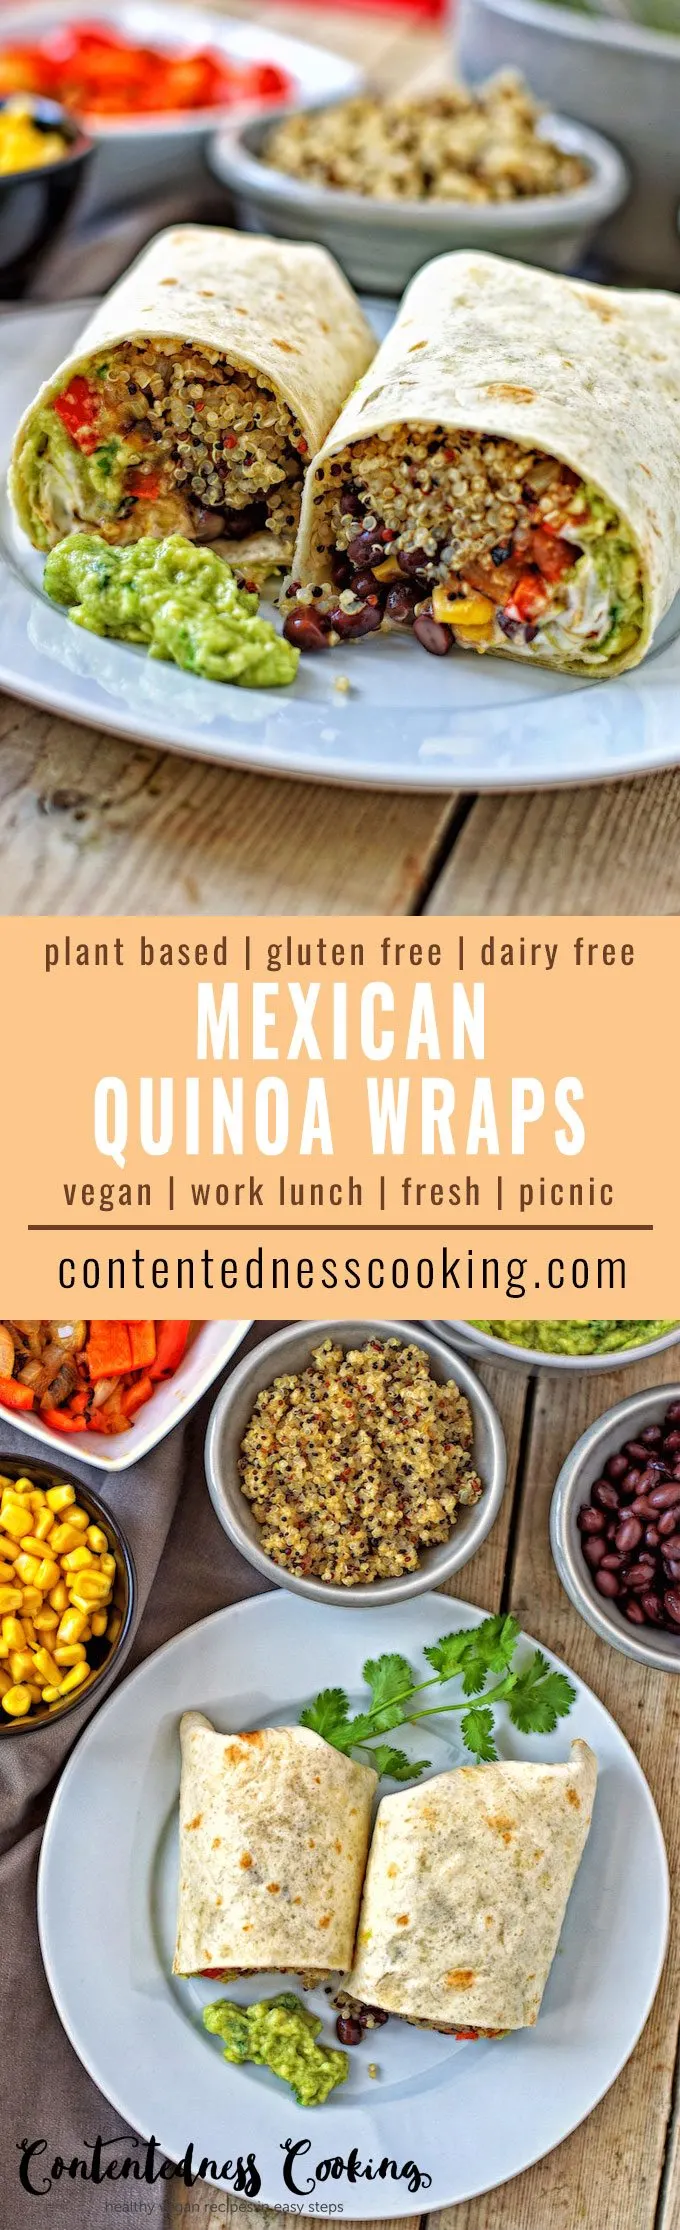 Collage of two pictures of Mexican Quinoa Wraps with recipe title text.